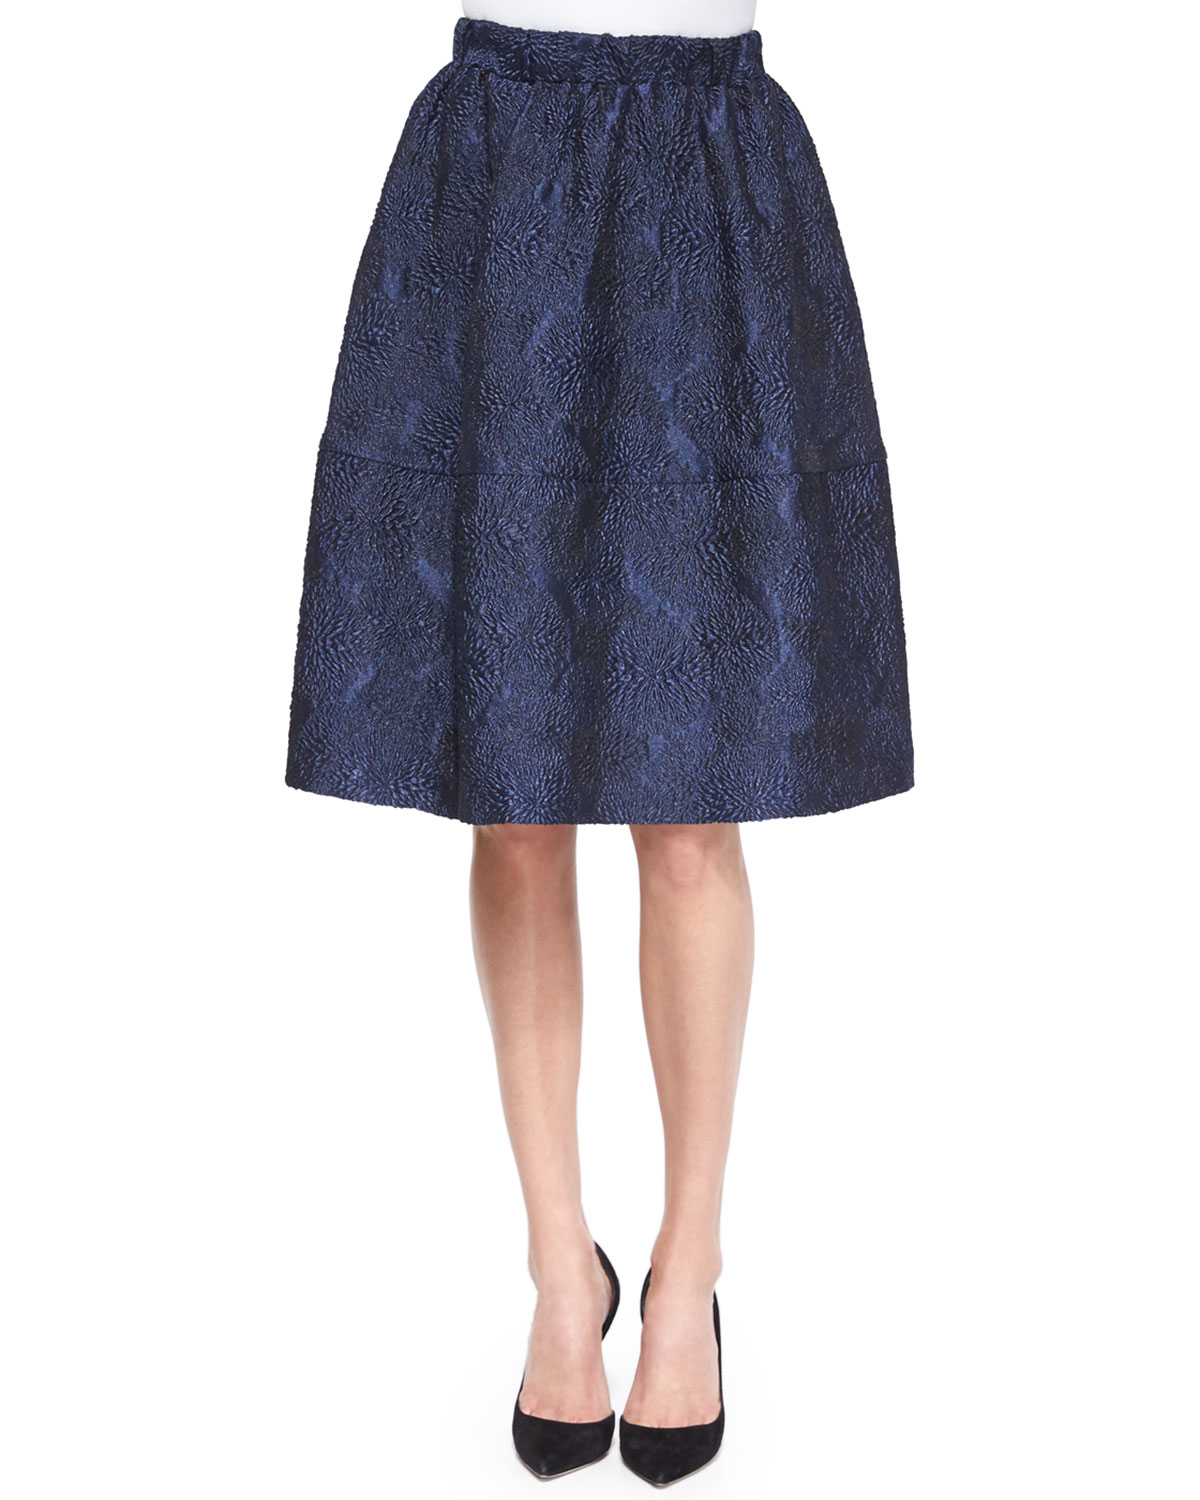 Lyst - Co. Tuck-Pleated Jacquard Bell Skirt in Blue